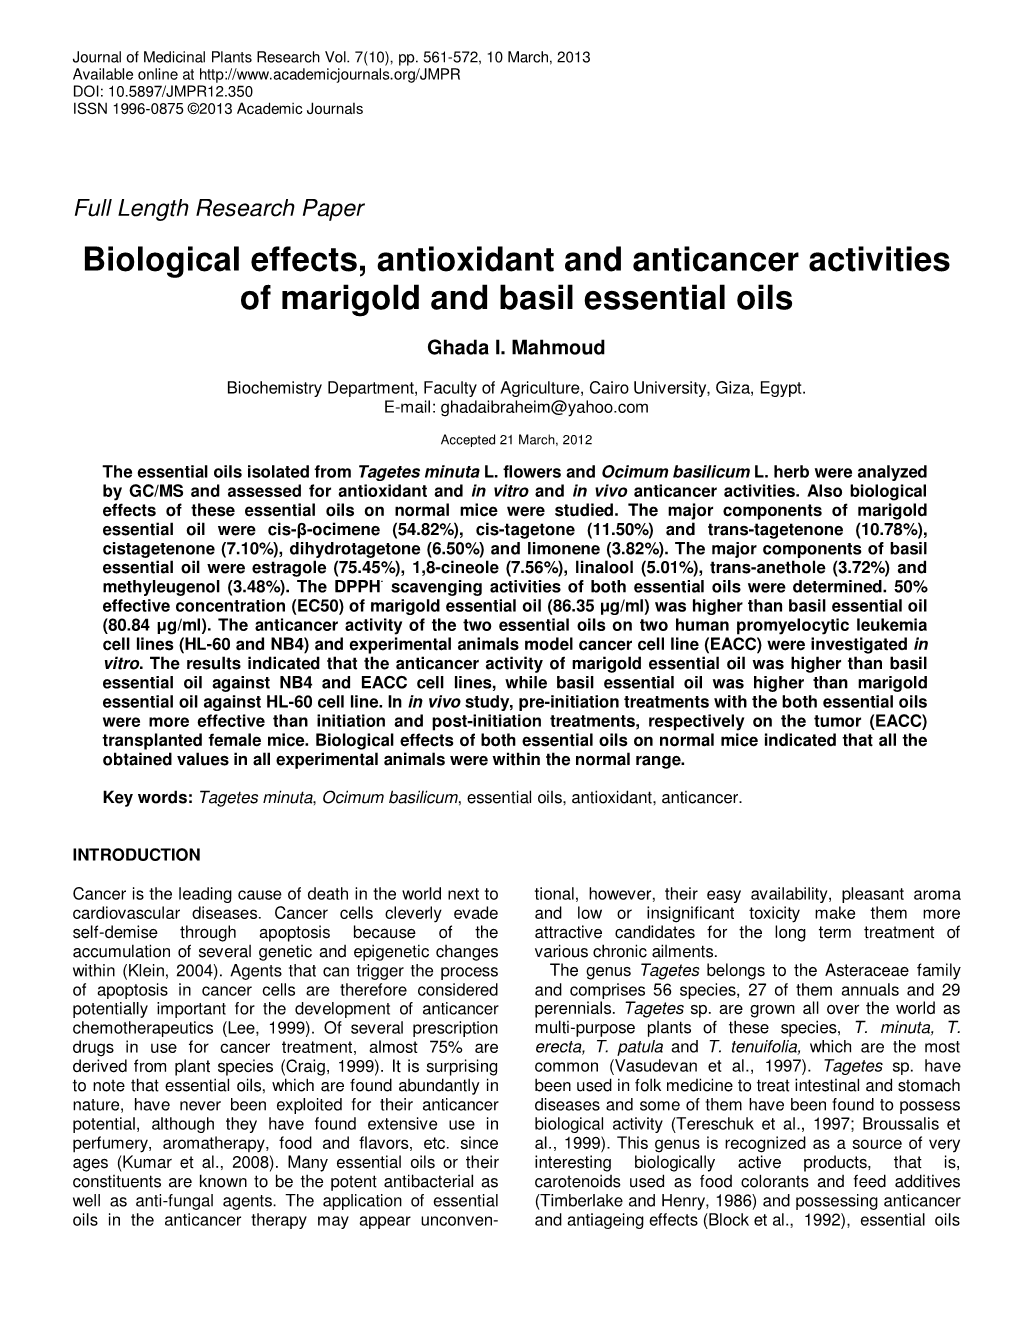 Biological Effects, Antioxidant and Anticancer Activities of Marigold and Basil Essential Oils